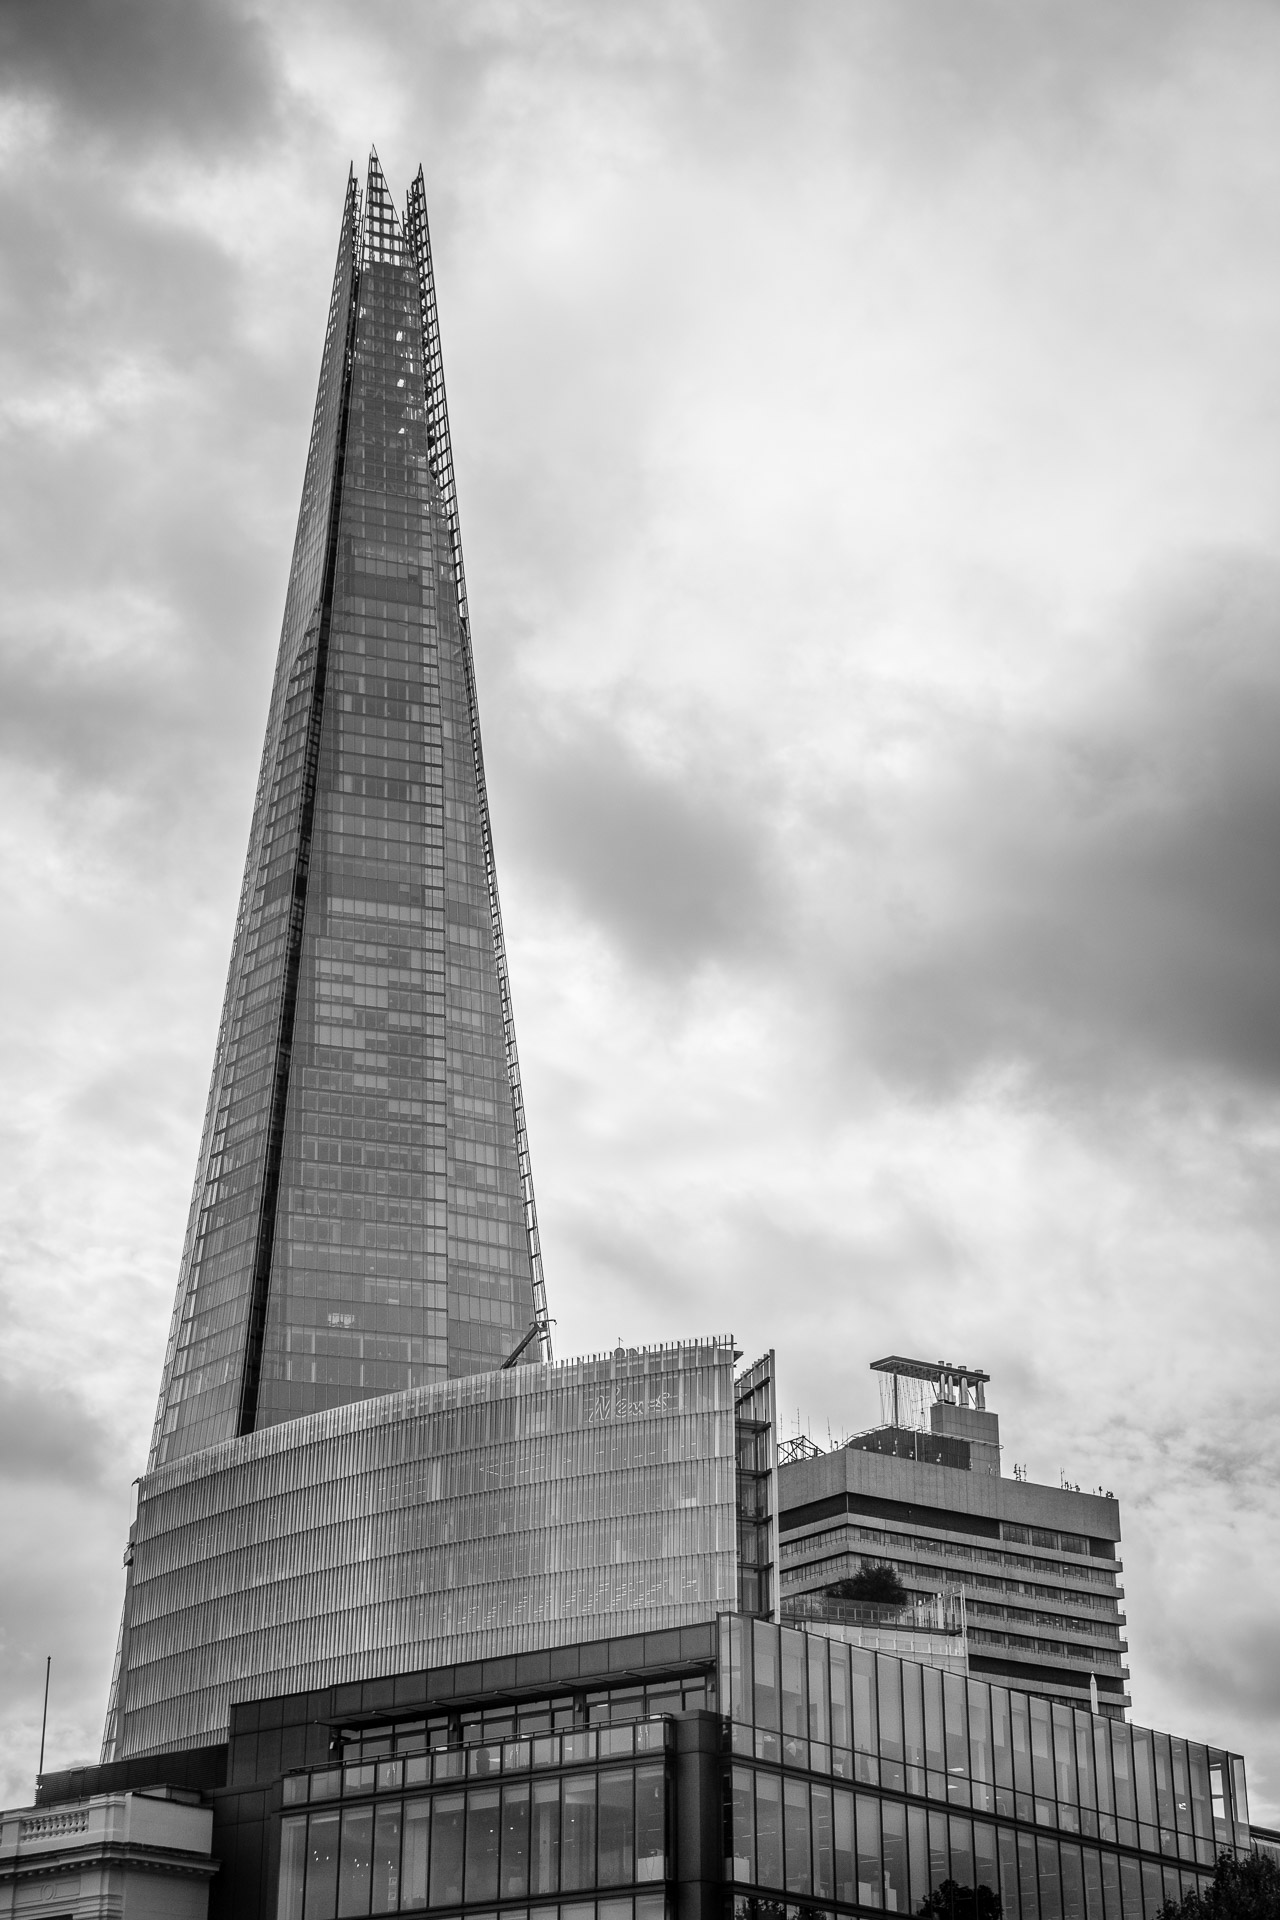 The Shard while cruising down the Thames in London